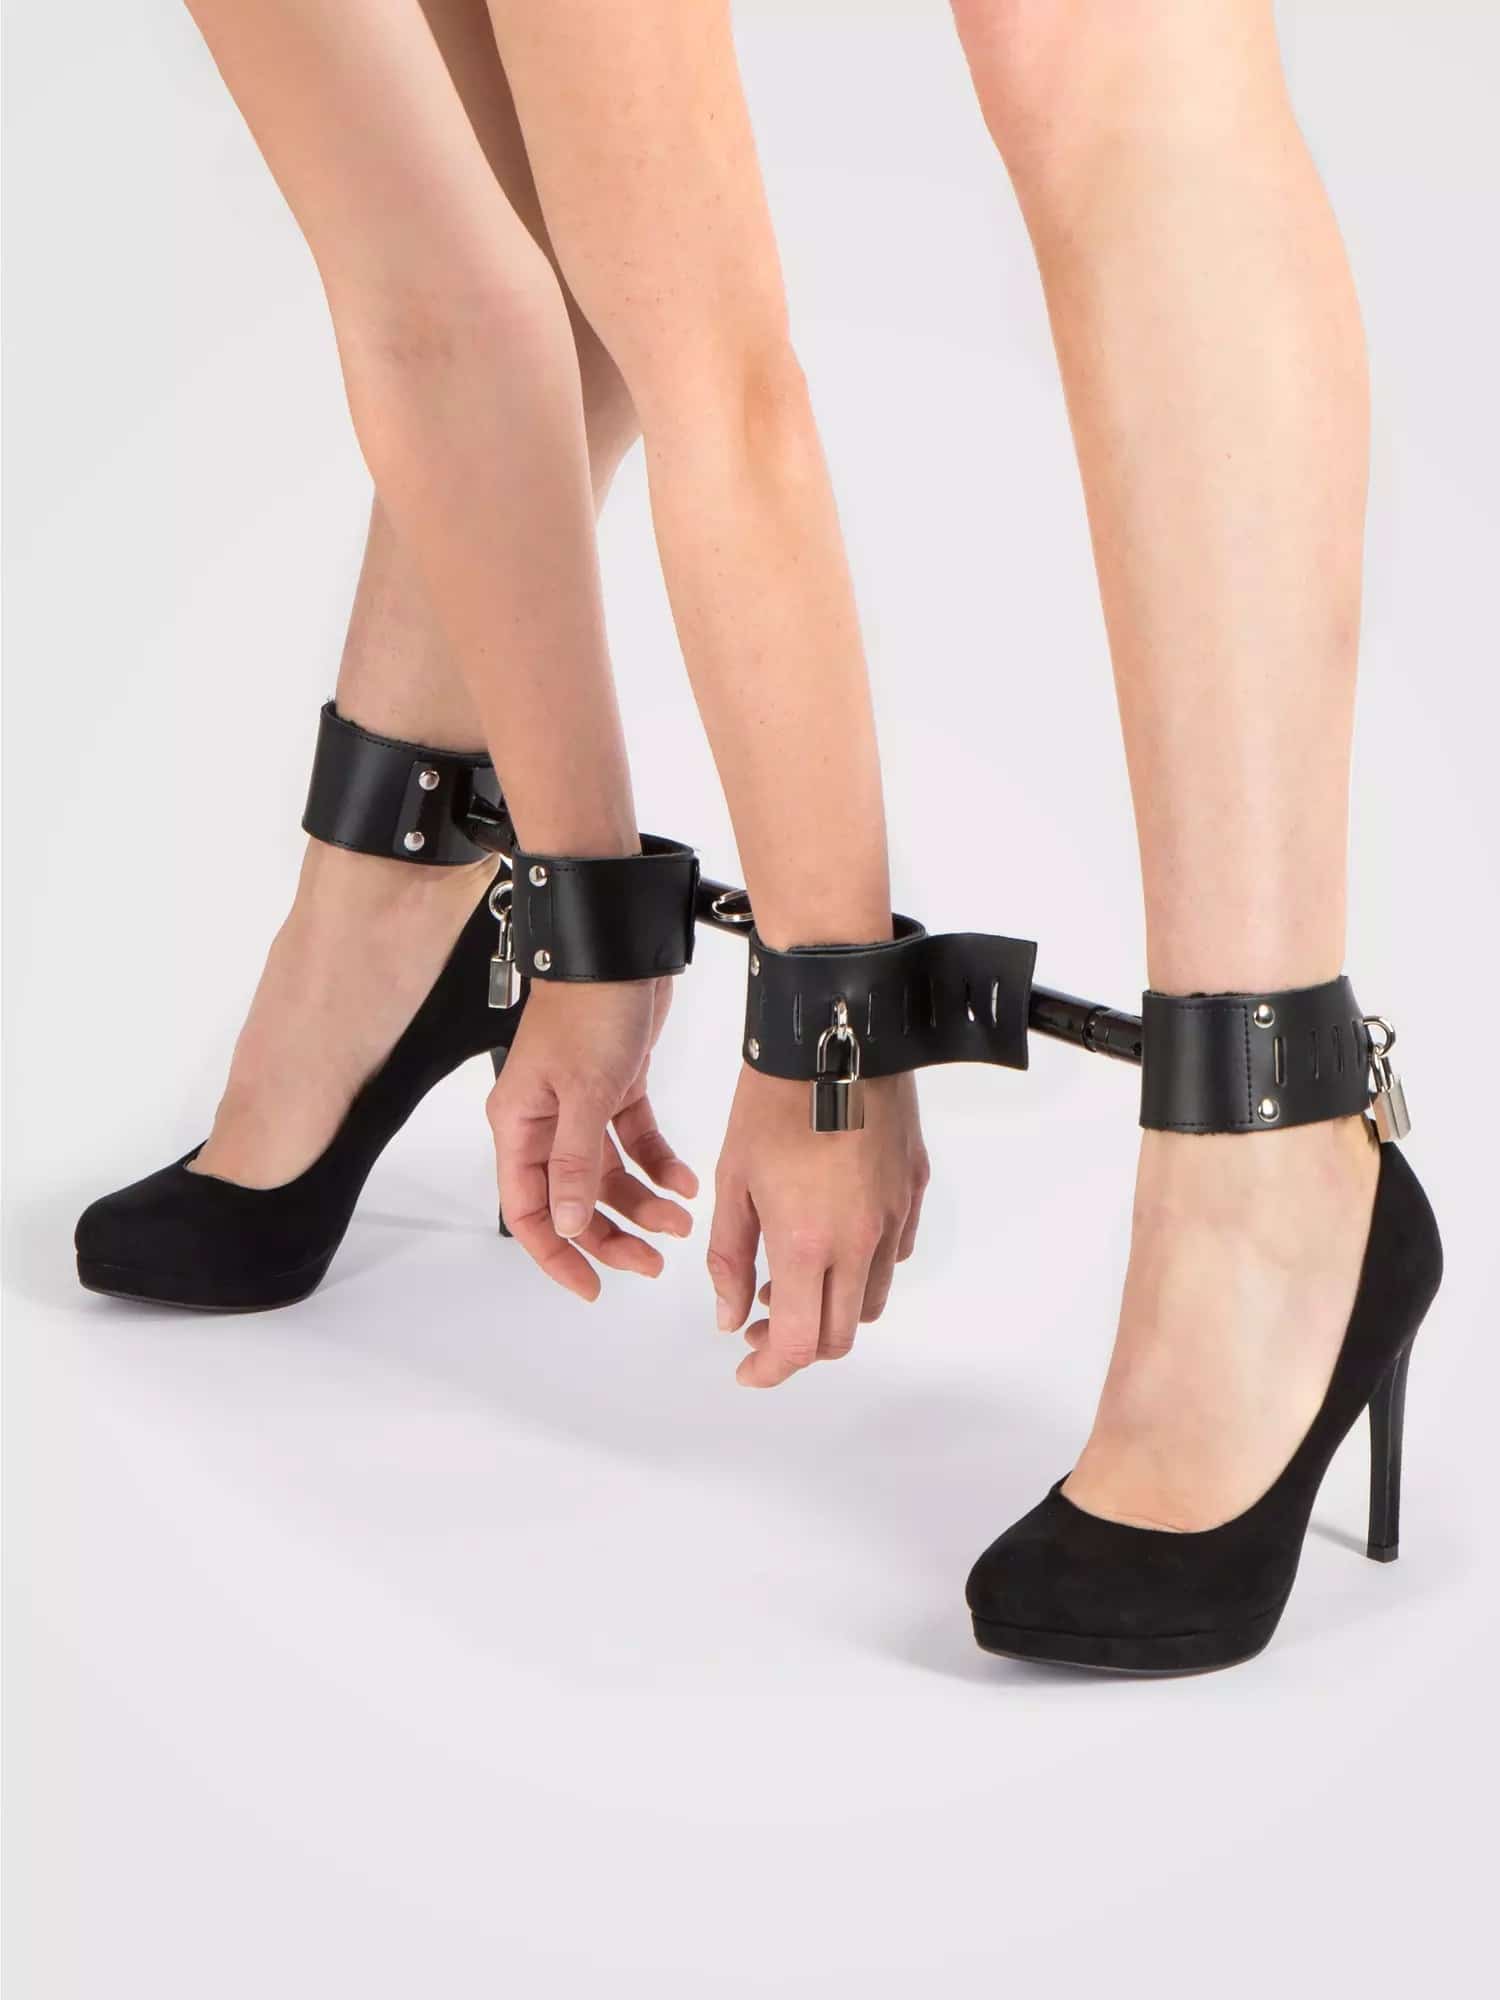 Bondage Boutique Extreme Expandable Spreader Bar with Leather Cuffs. Slide 1